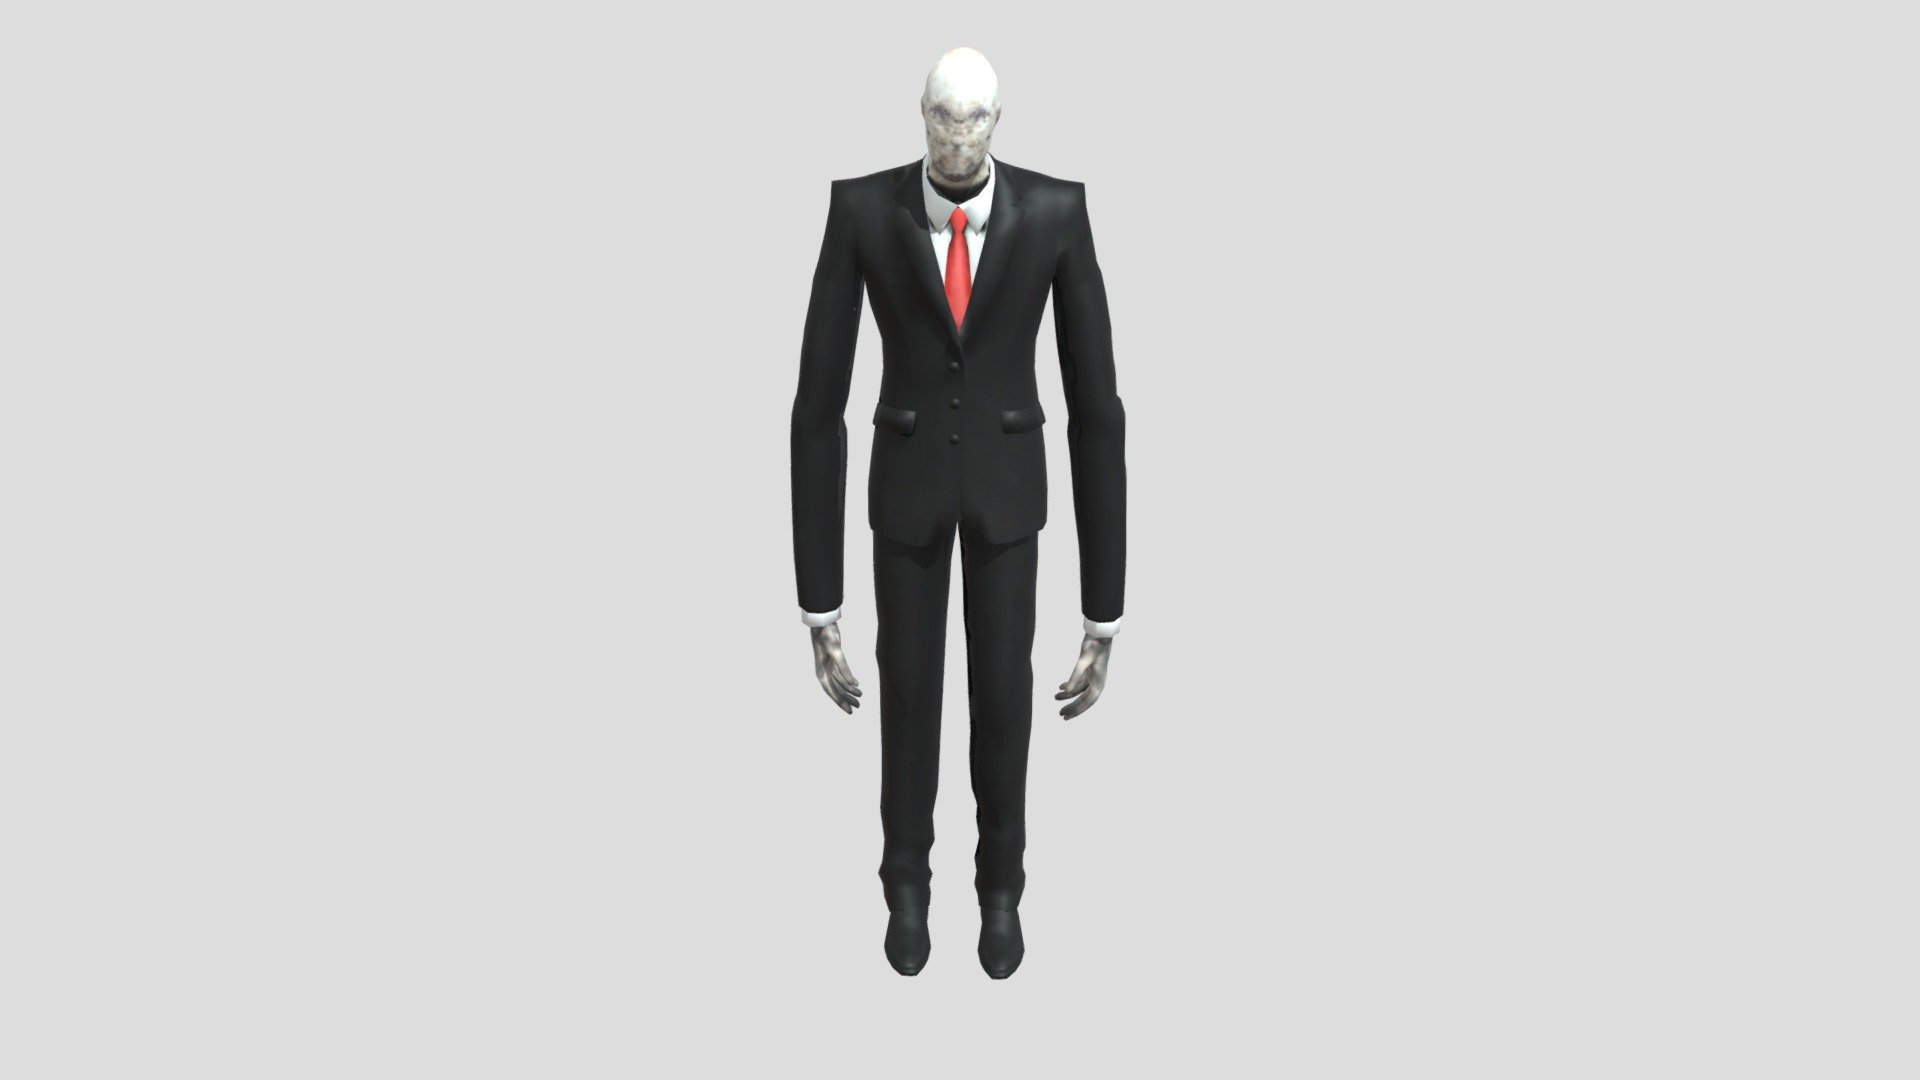 download slenderman the arrival for android